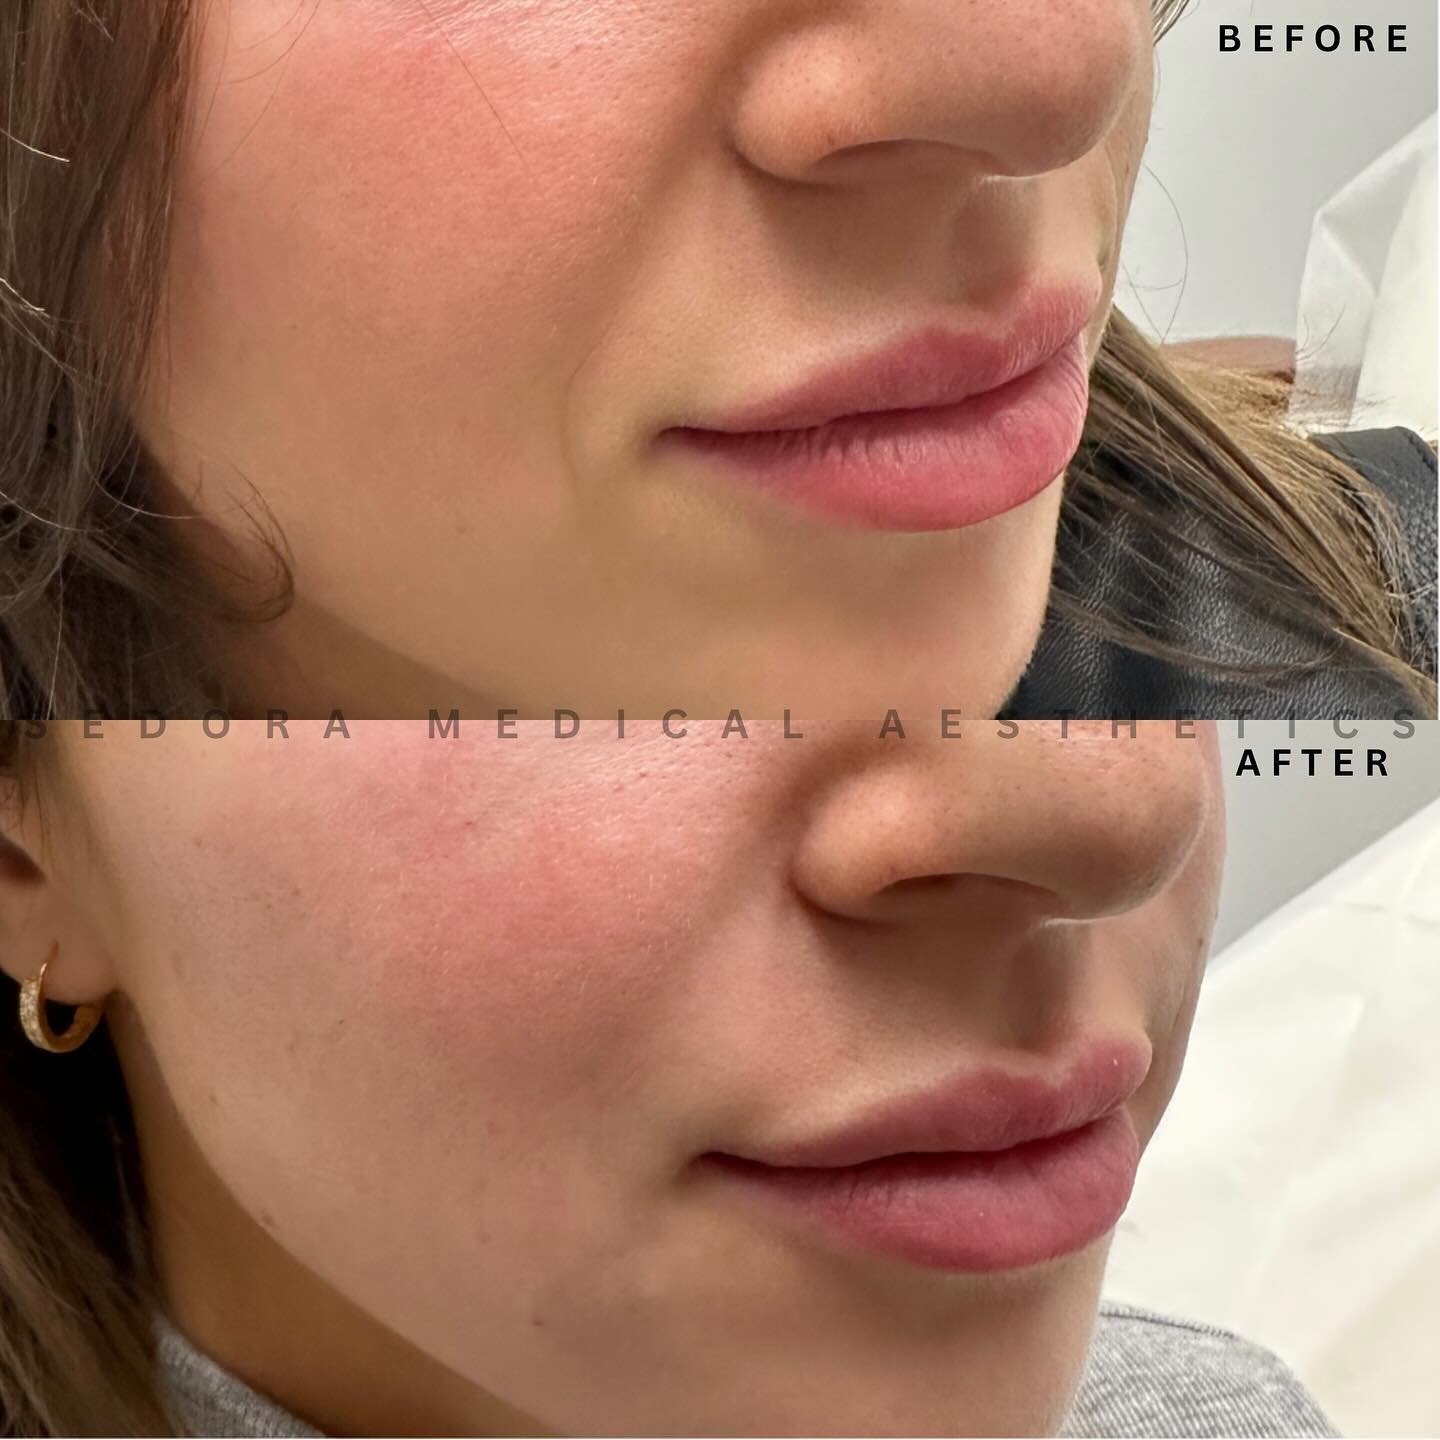 Smile Line Filler 💉Airbrushing away those deep folds beside the mouth.

Obsessed with how seamless filler looks in this area. Designed to help support your natural expressions - maintaining natural movement when you smile.

Book with us today! 
☎️(9